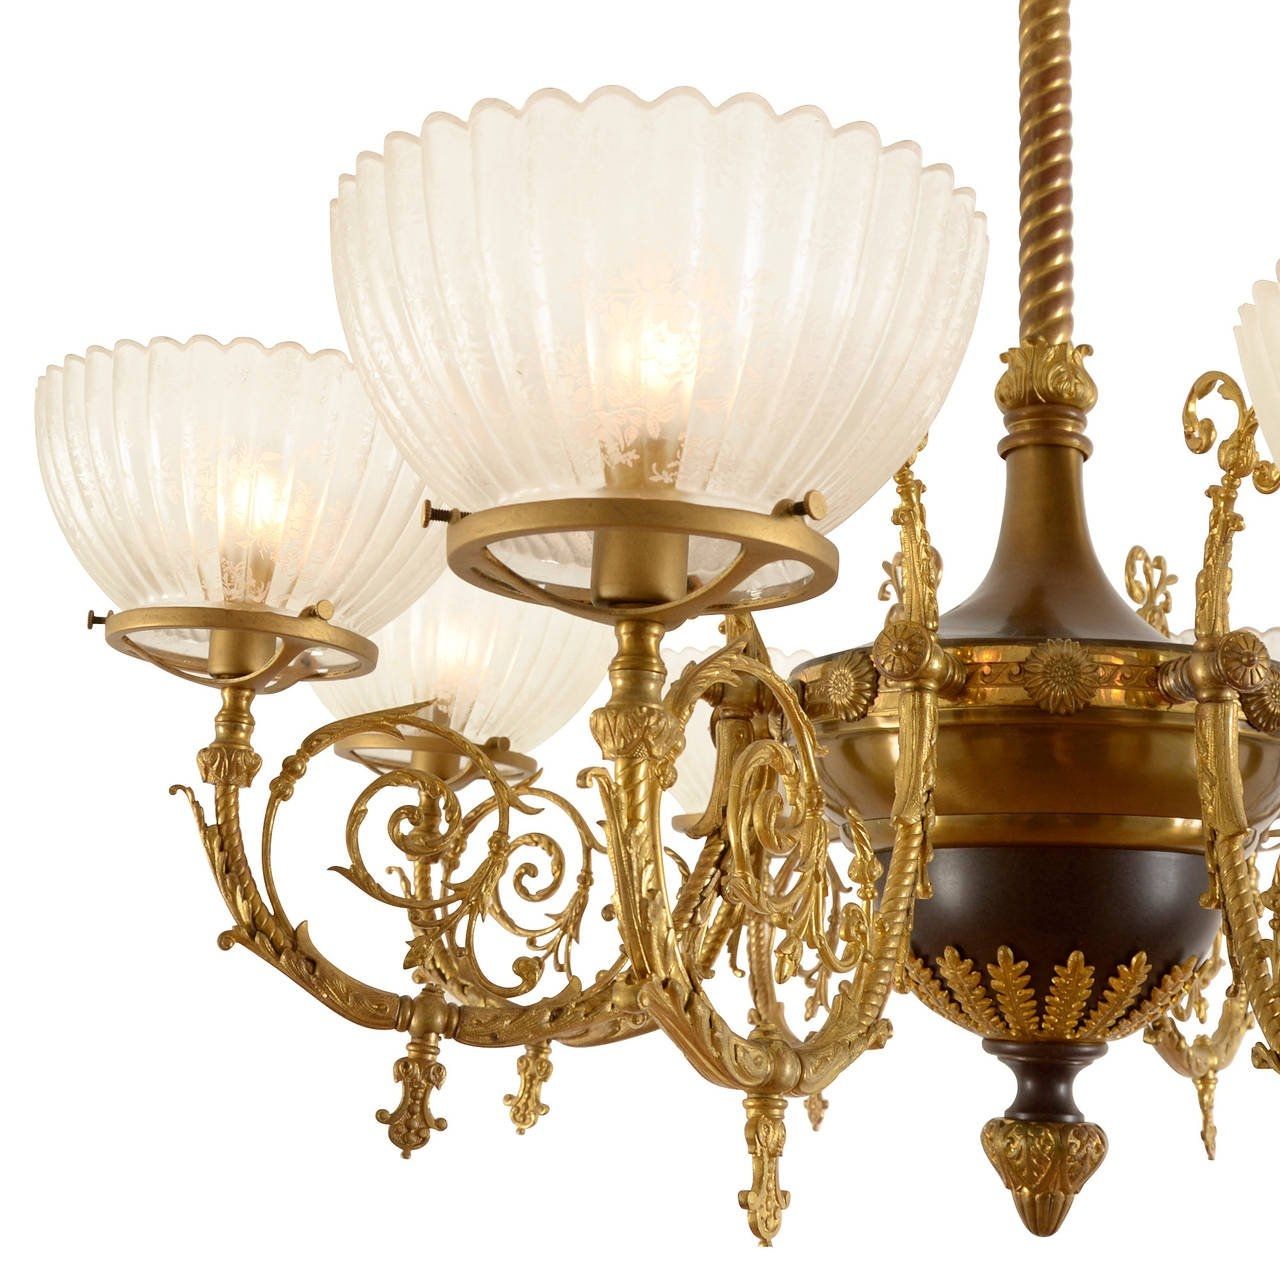 Eight Light Beaux Arts Chandelier With Ornate Ormolu Circa 1895 Intended For Ornate Chandeliers (View 8 of 12)